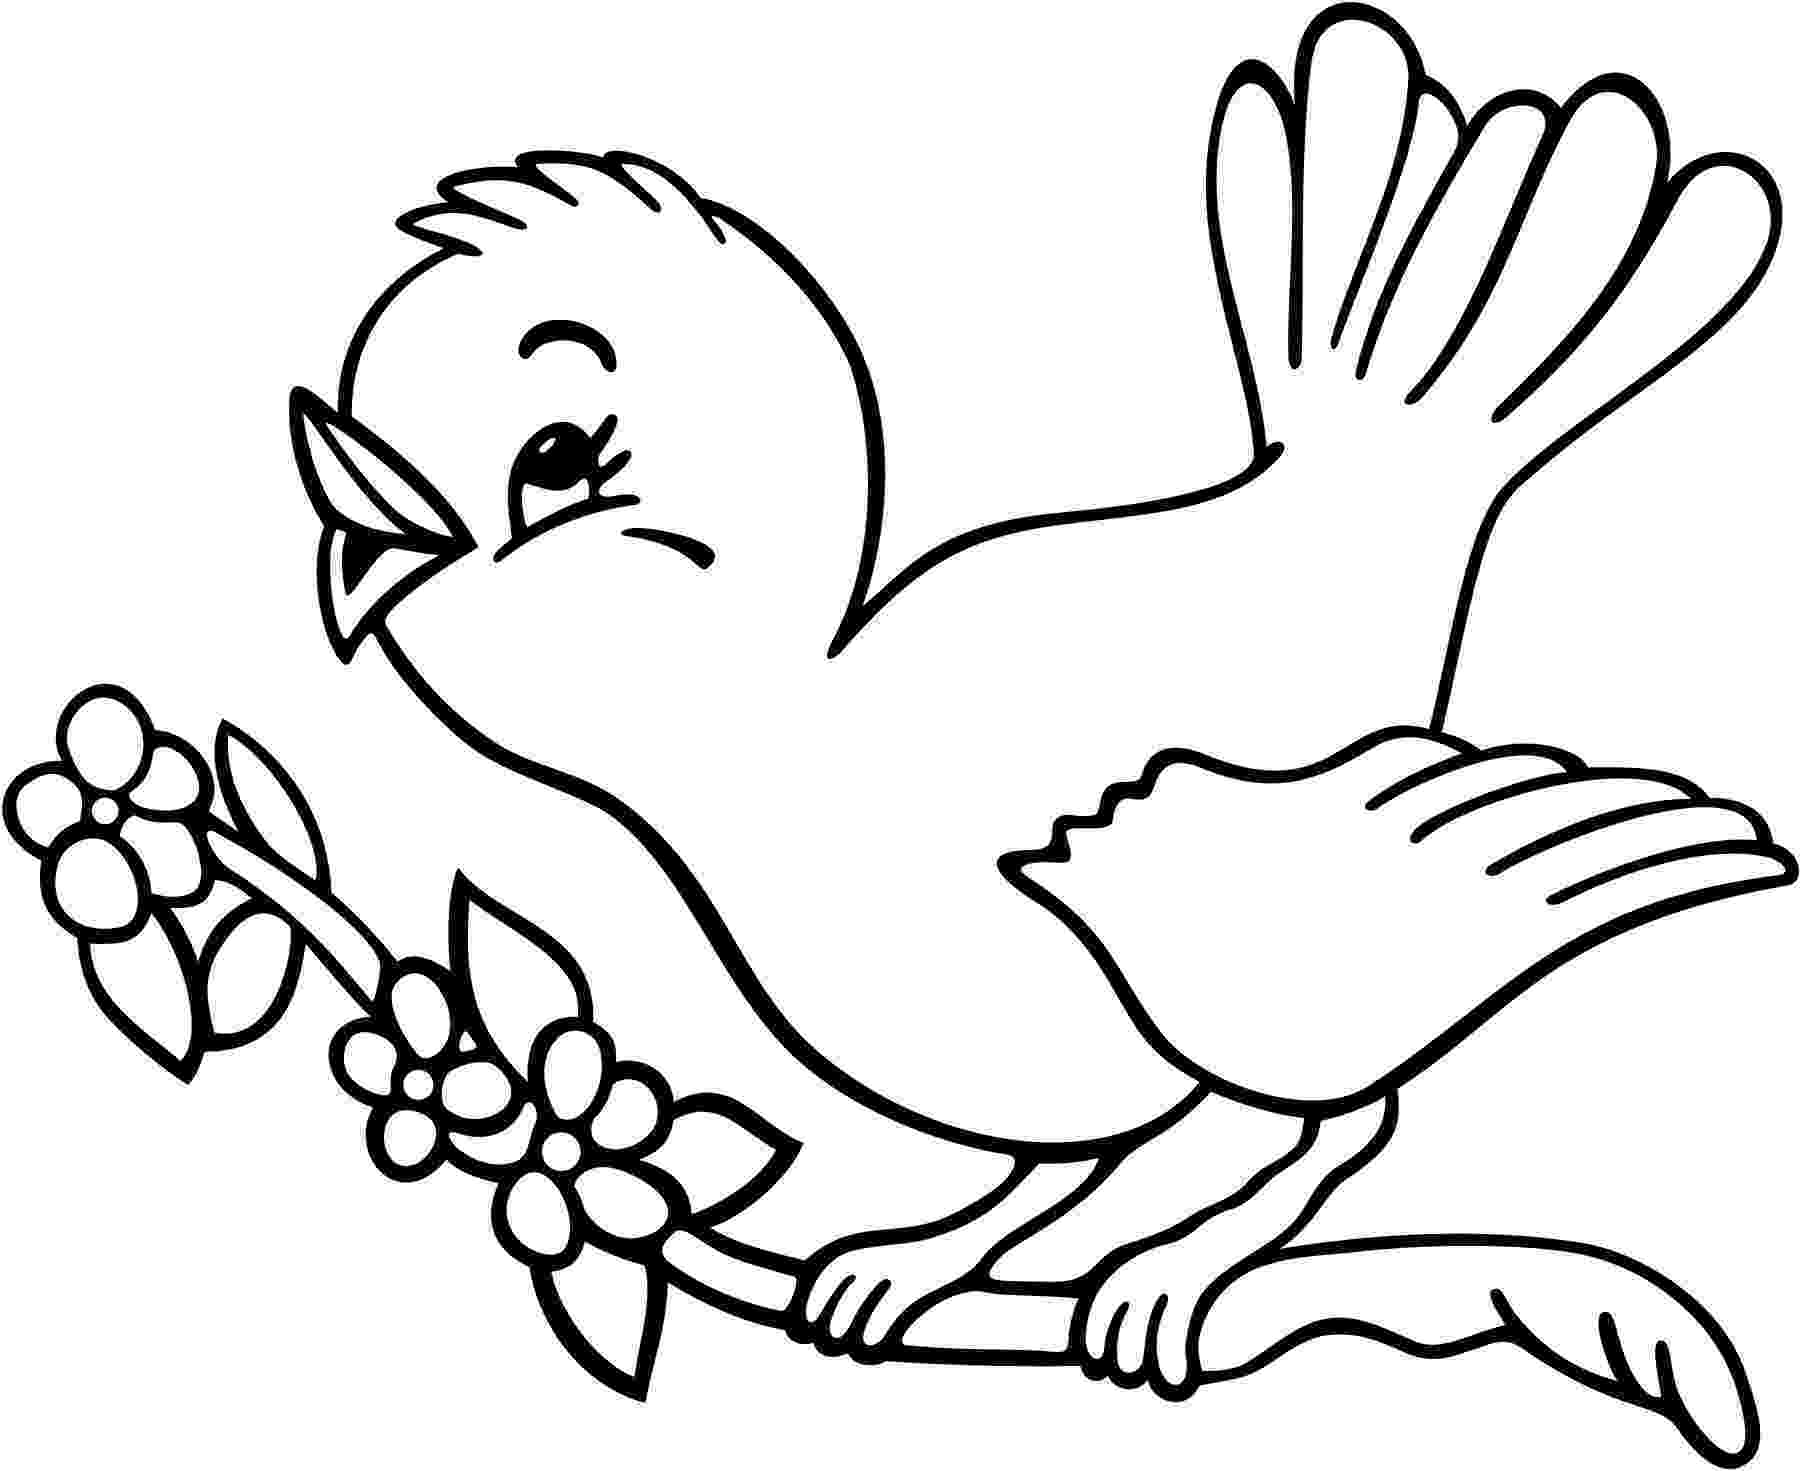 bird coloring sheet bird coloring pages to download and print for free bird sheet coloring 